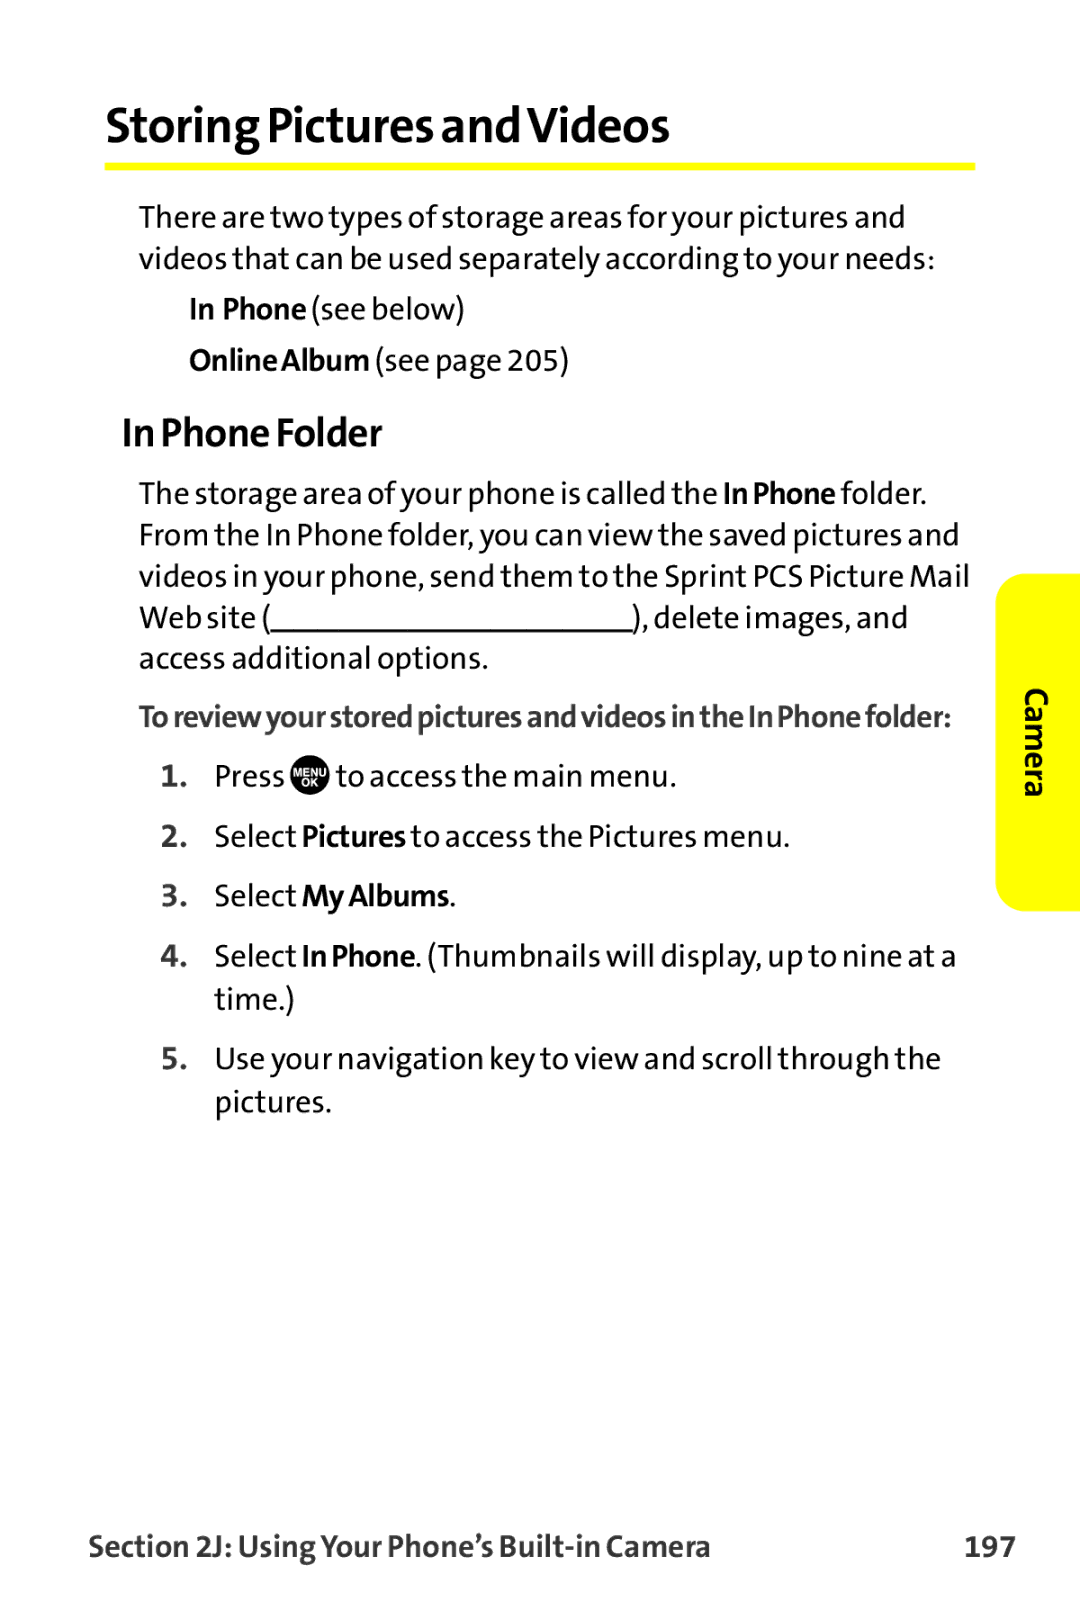 Sprint Nextel MM-7500 StoringPicturesandVideos, Phone Folder, Select My Albums, Using Your Phone’s Built-in Camera 197 